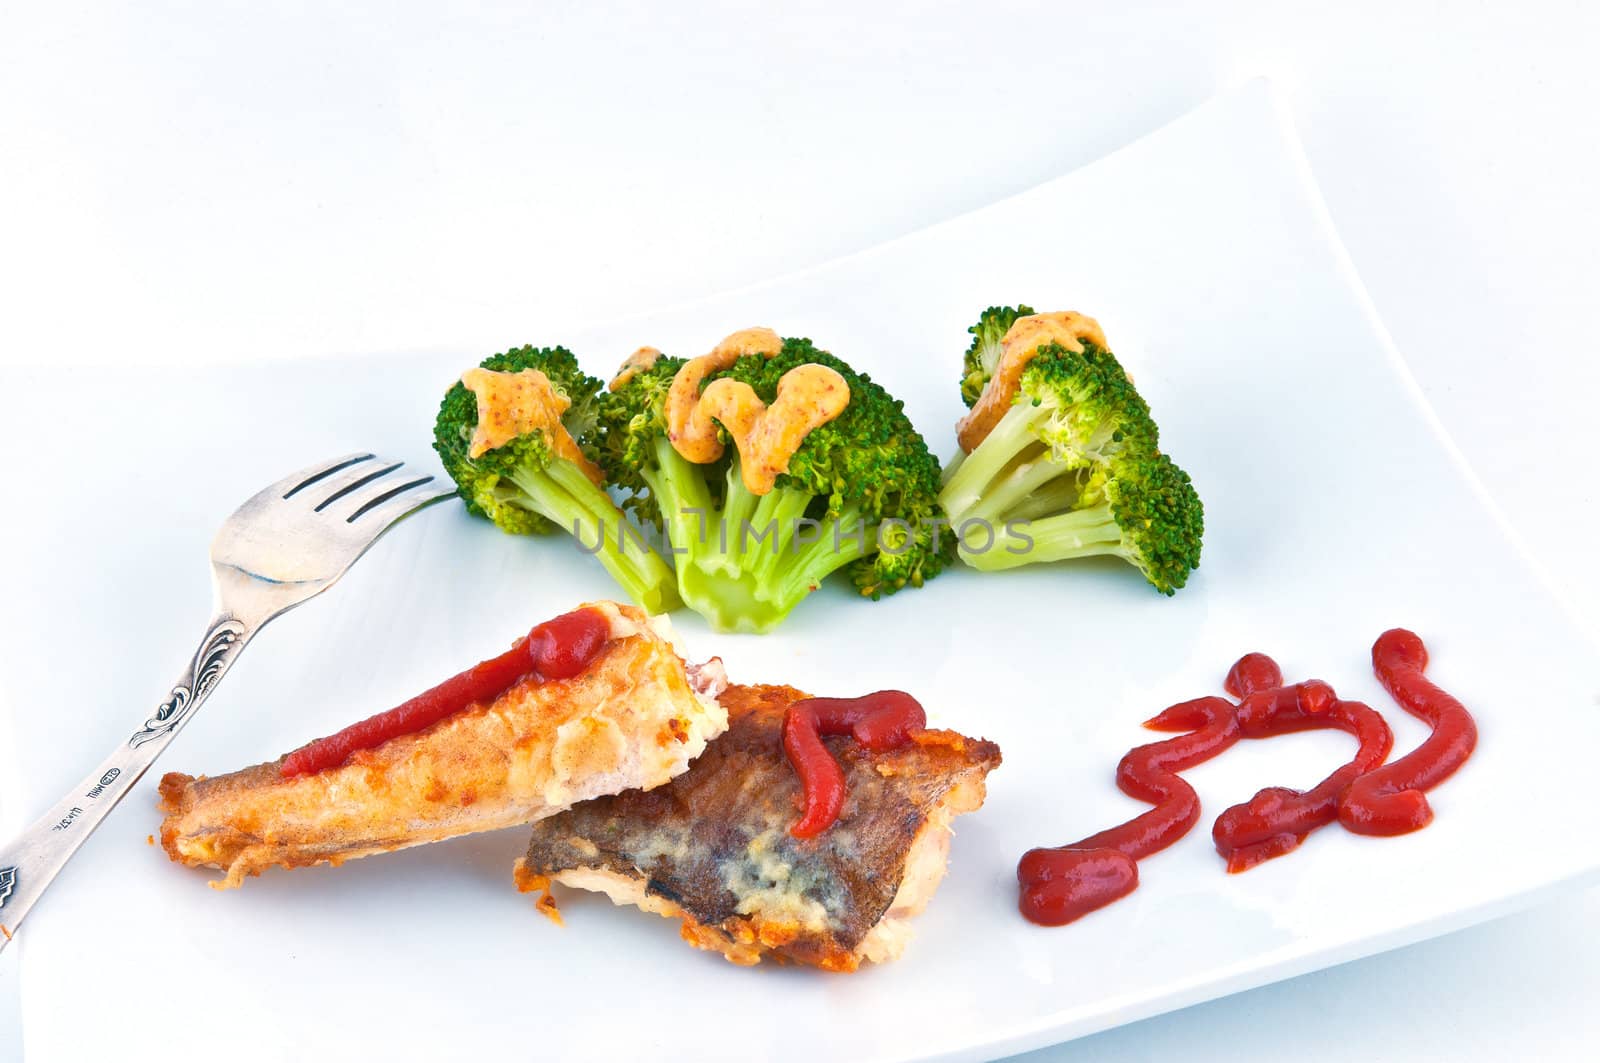 Fried fish poured ketchup, not near a plate with a grainy mustard broccoli